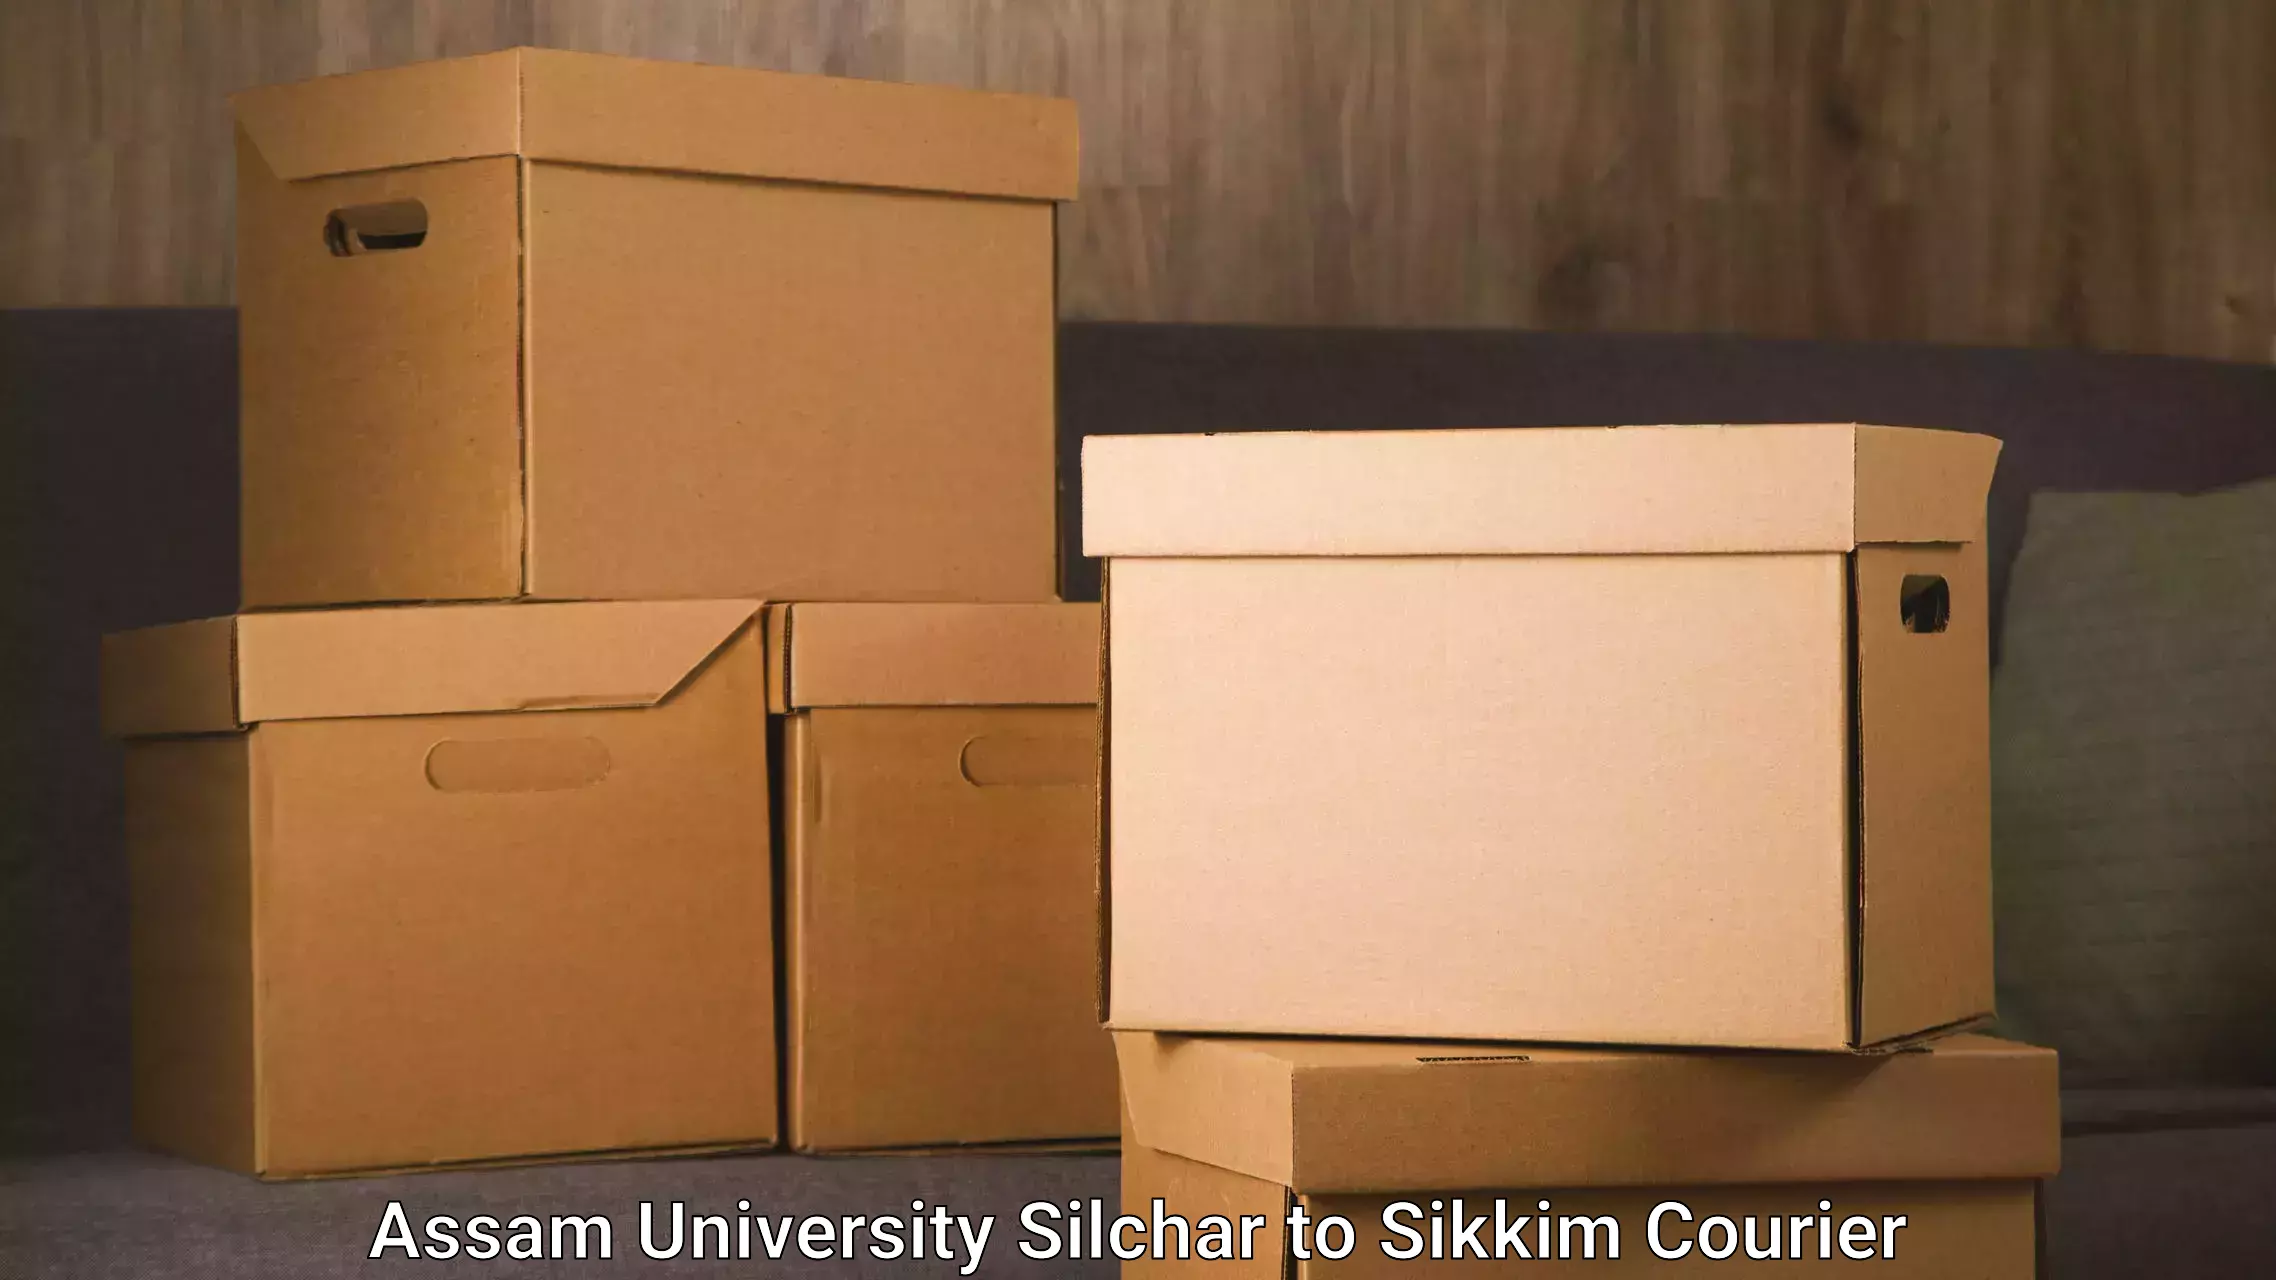 Full-service courier options Assam University Silchar to Pelling